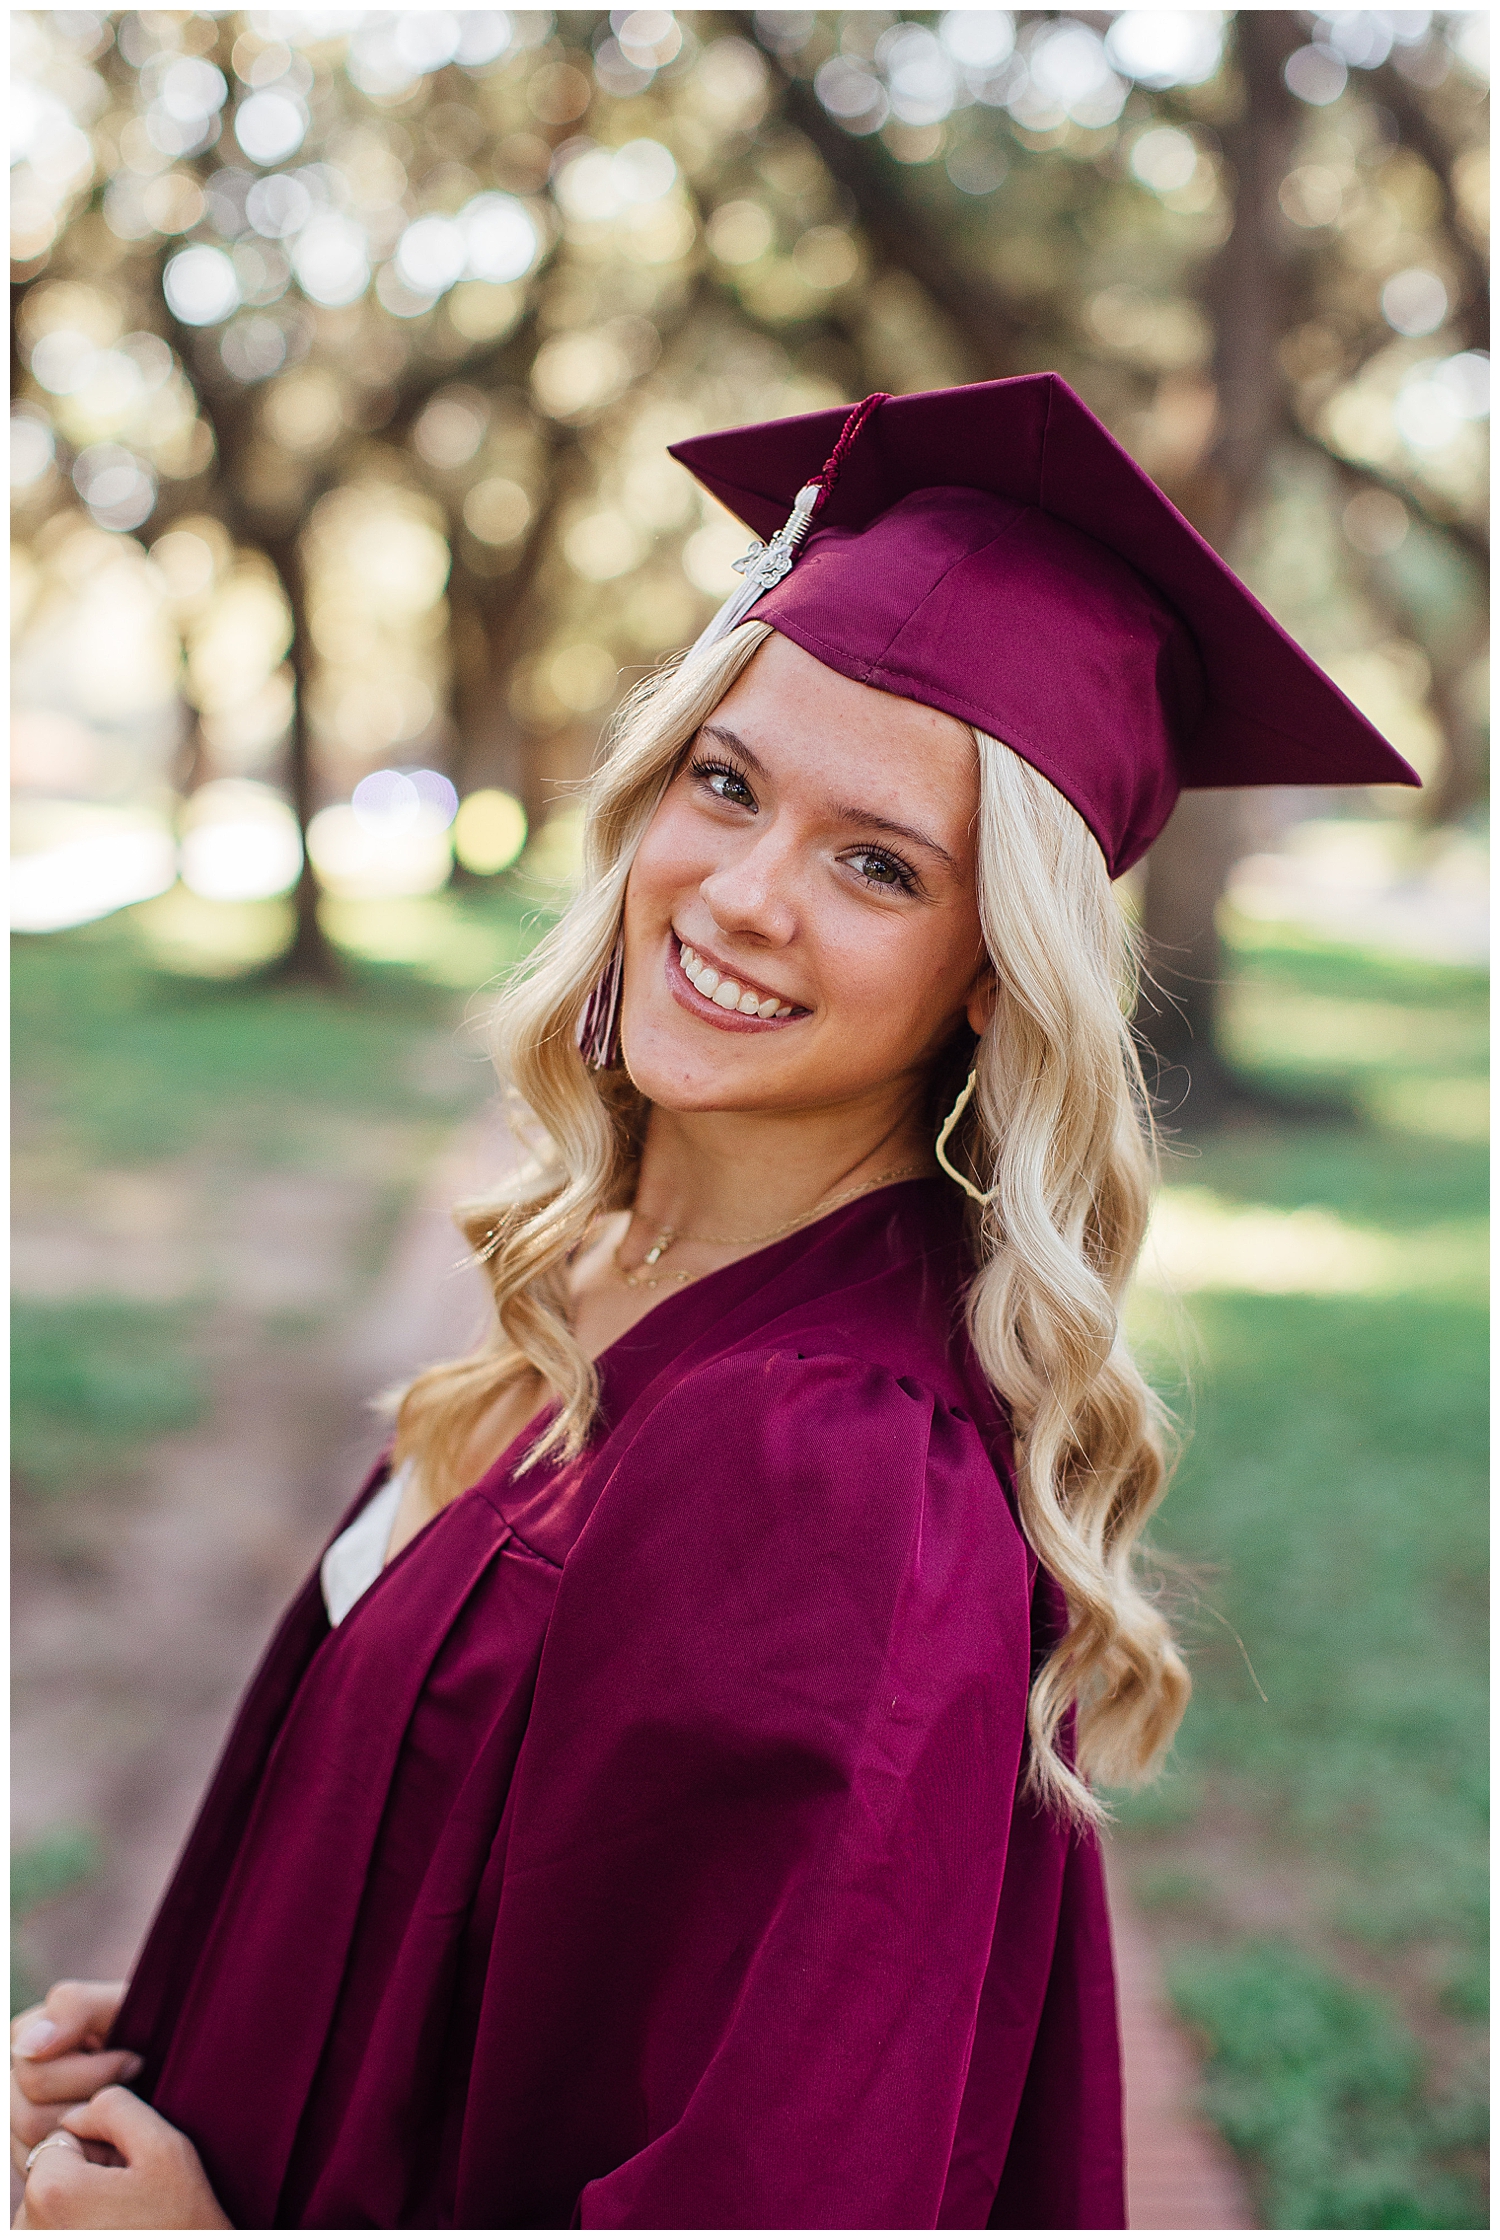 girl standing outdoors smiling wearing maroon graduation cap and gown